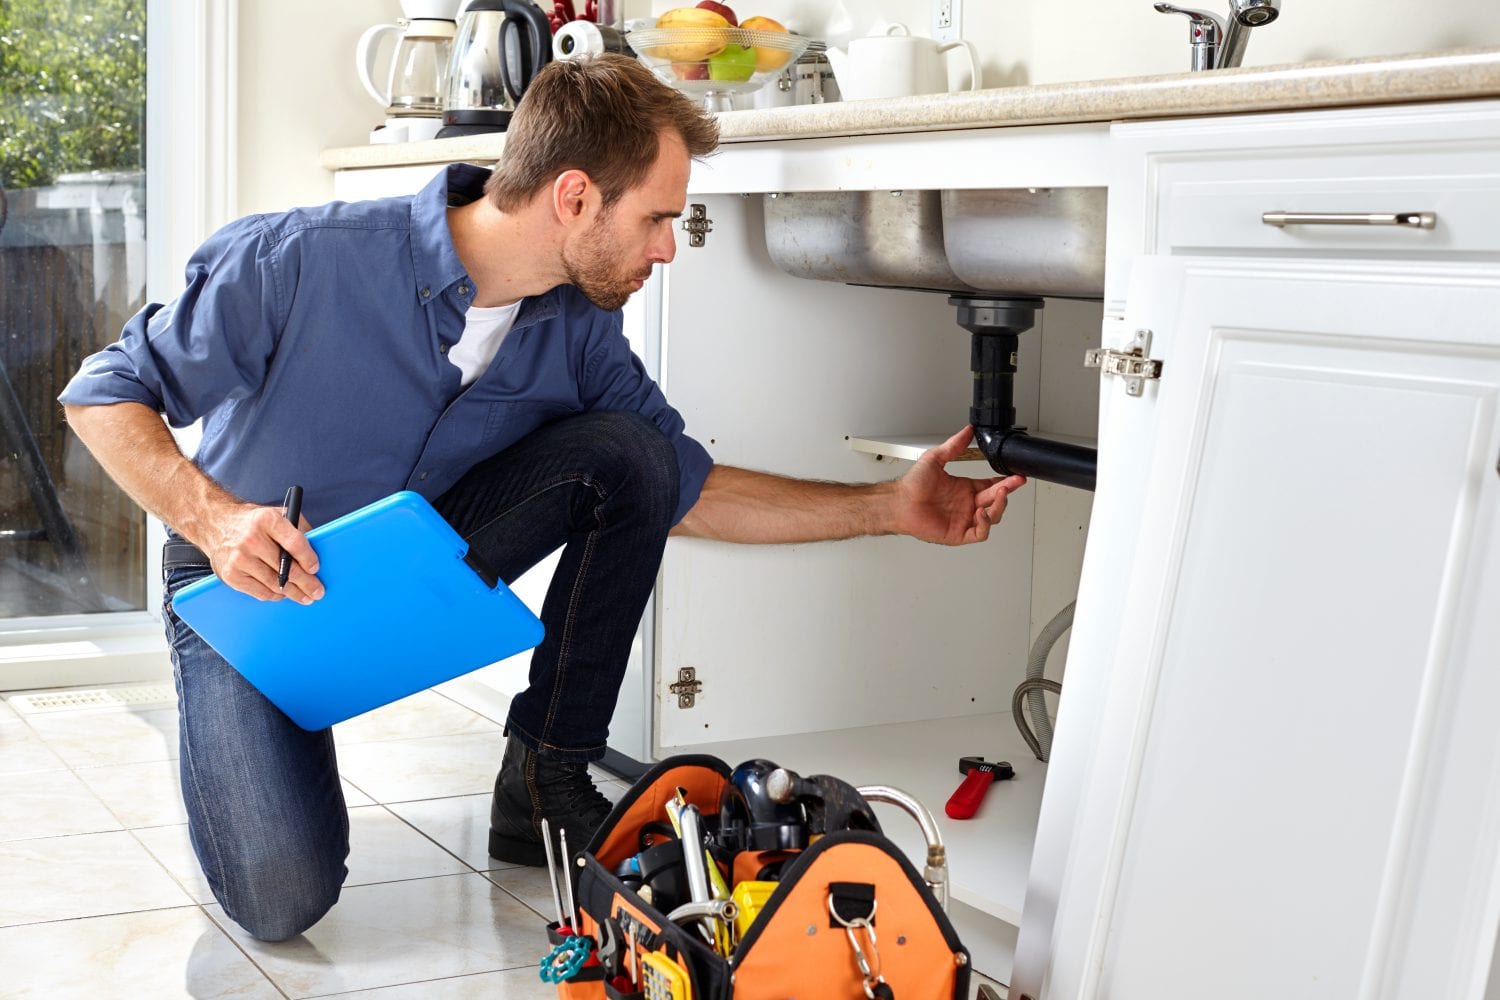 A A plumber  is standing in front of a service truck.is kneeling down in a kitchen looking under a sink.